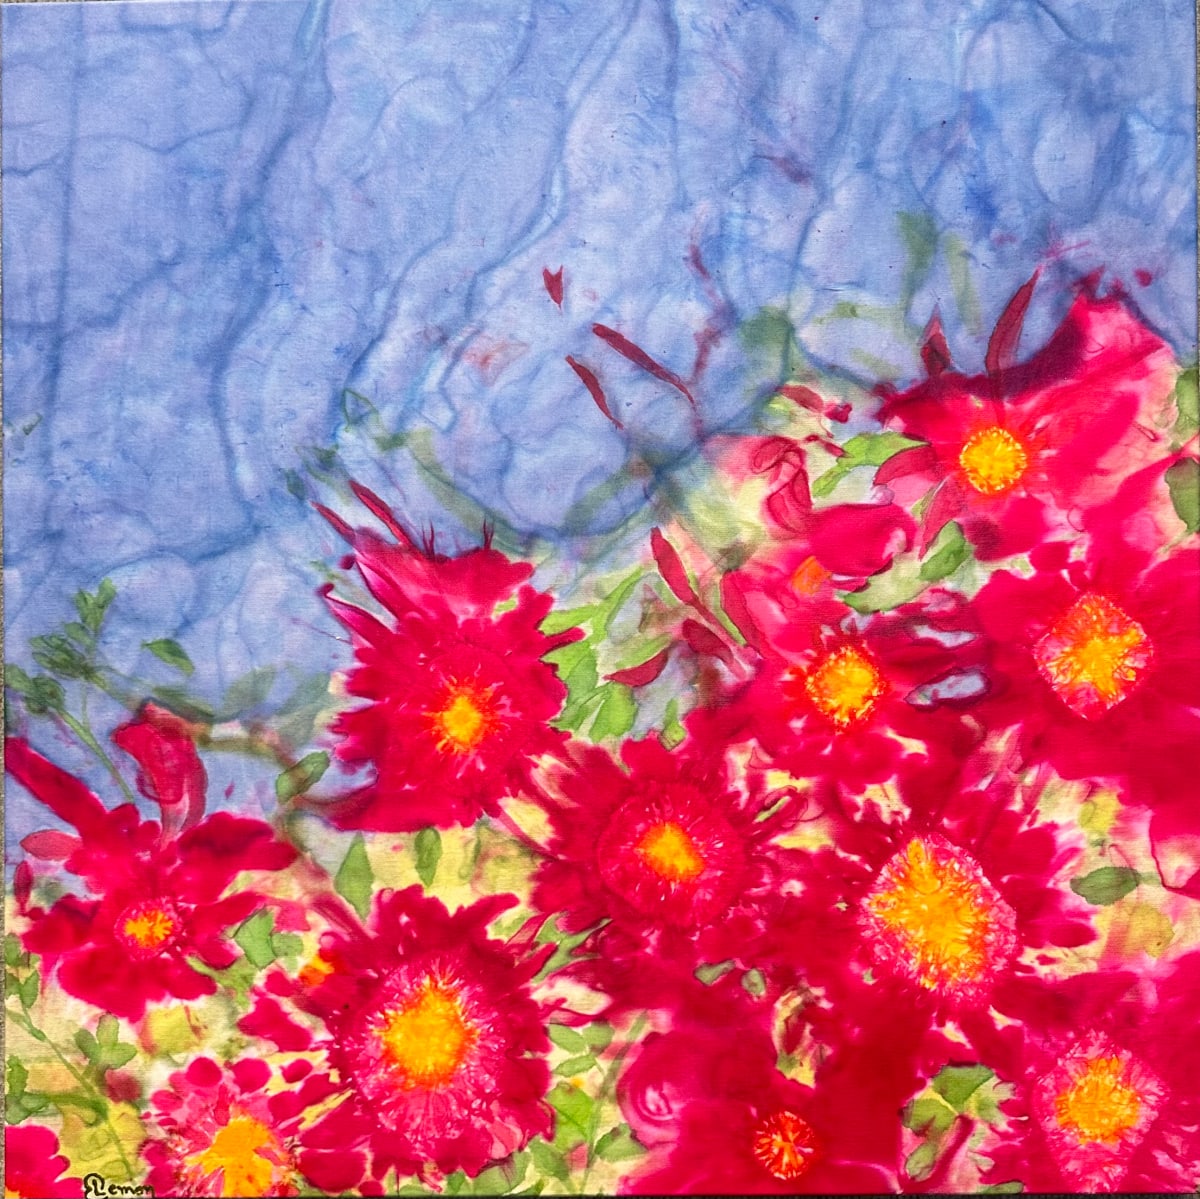 Windy Day for Peonies by Elizabeth Lemon  Image: Windy Day for Peonies - varnished on to canvas